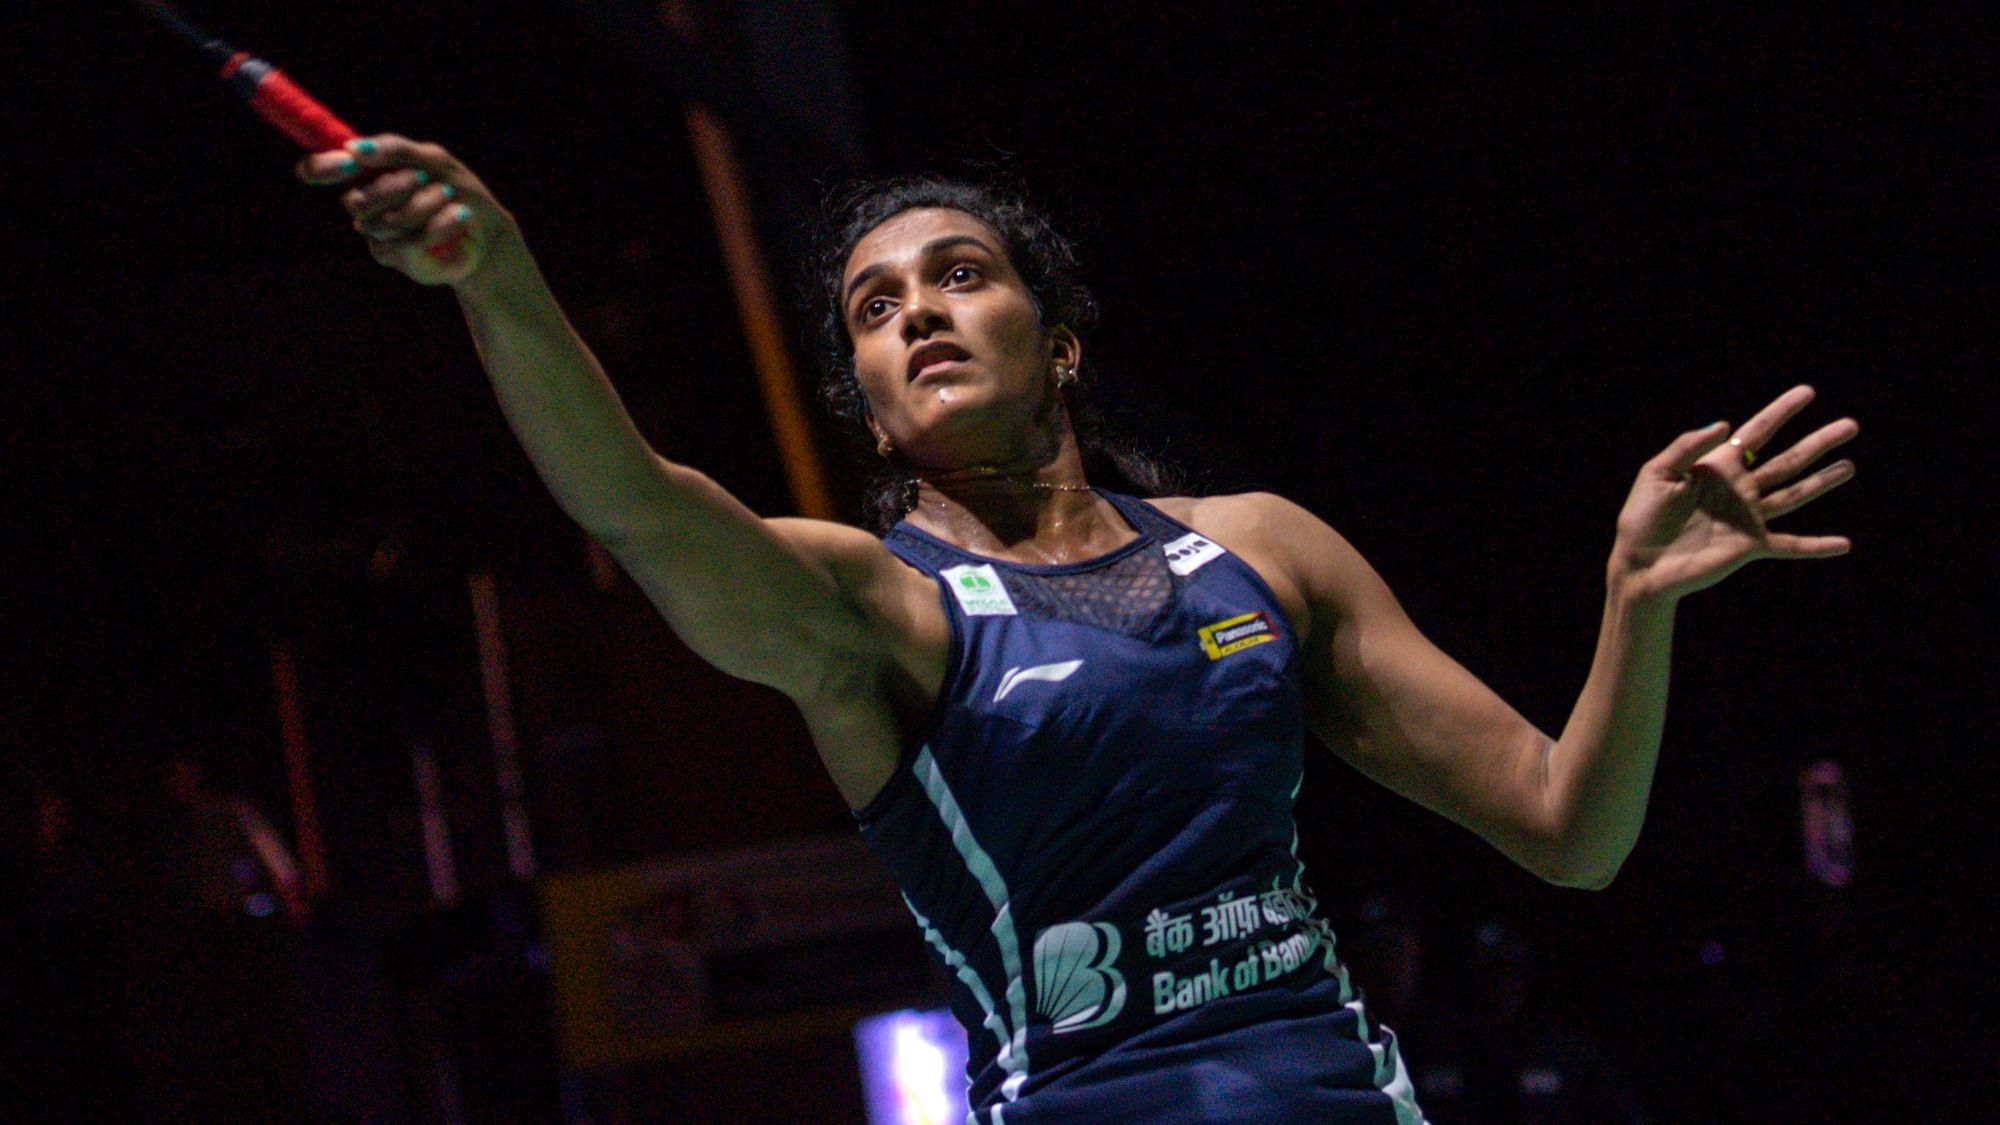 2019 BWF World Championships Live Streaming Online BWF Live PV Sindhu Final Telecast on Star Sports 1, Star Sports Select 2